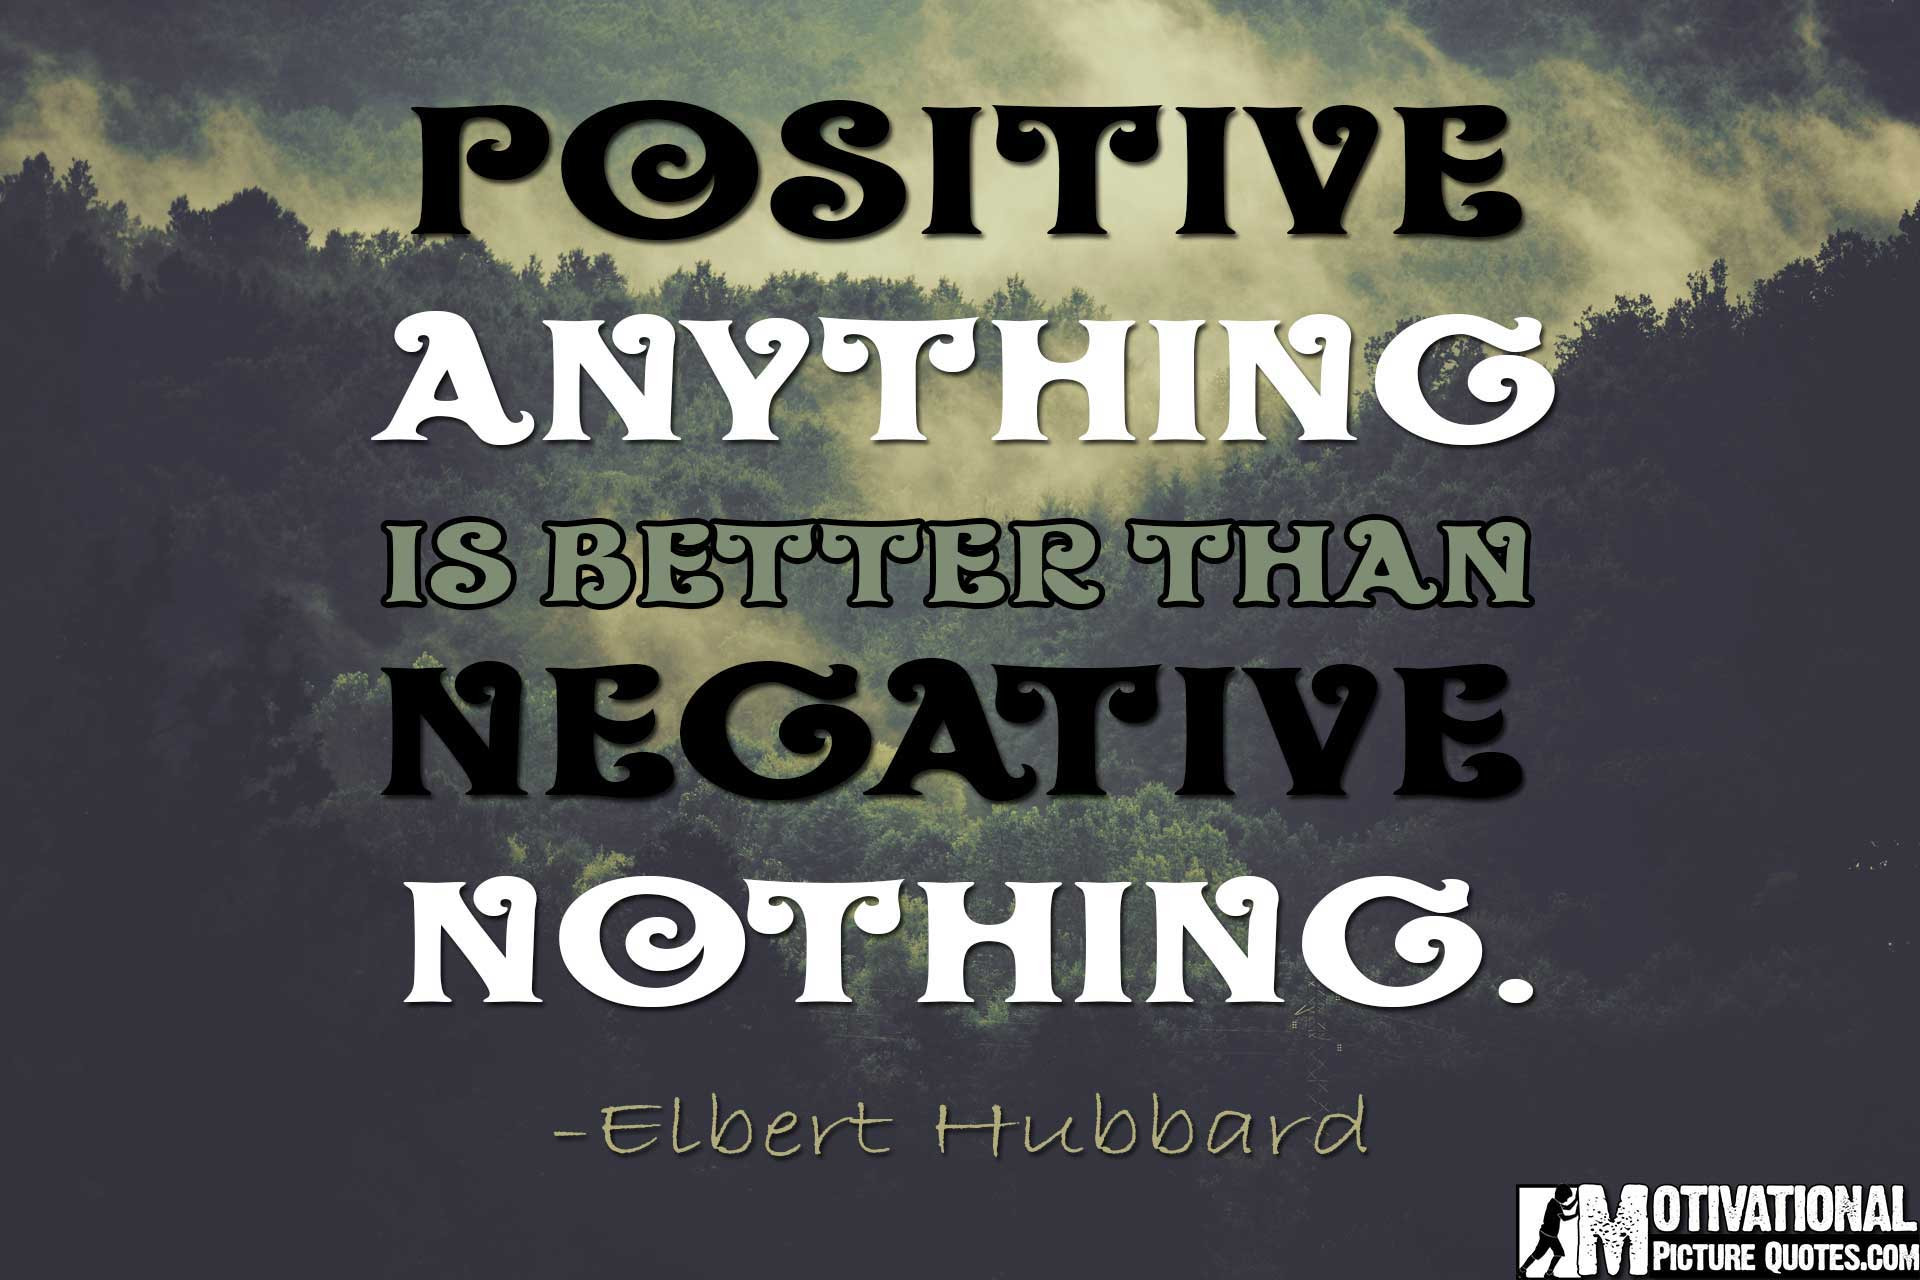 Quotes On Positivity
 The power of positive thinking quotes with